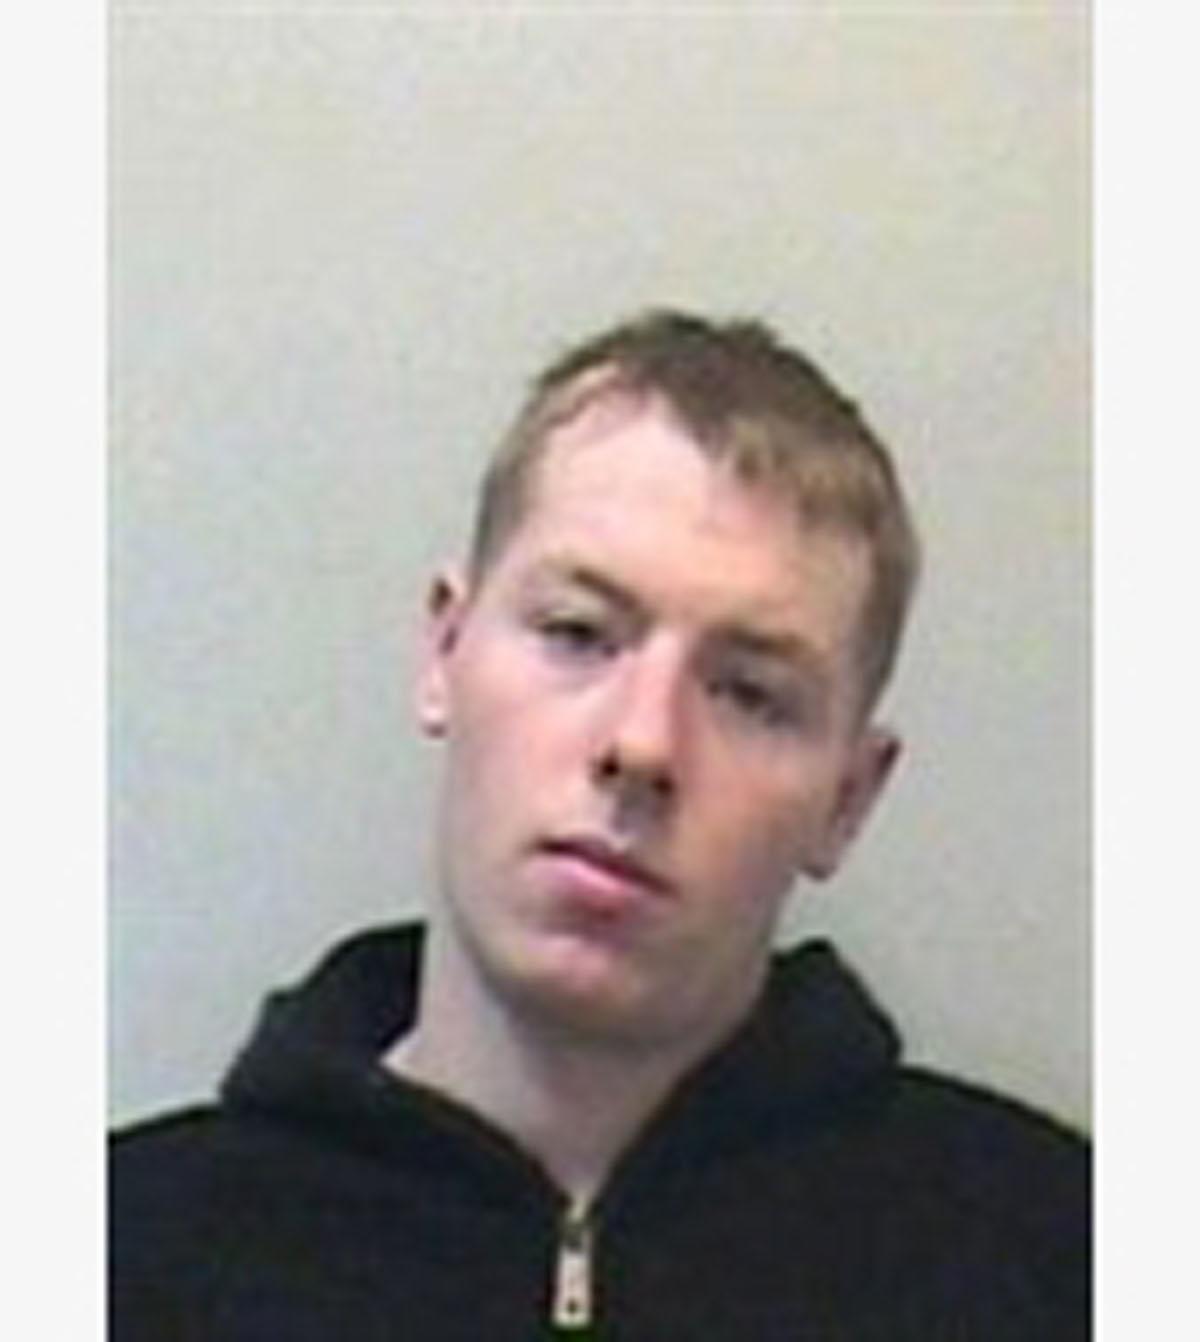 David Elston is wanted for failing to appear in court after being charged with a public order offence and assaulting a police officer in Selsey High Street in April 2008. 